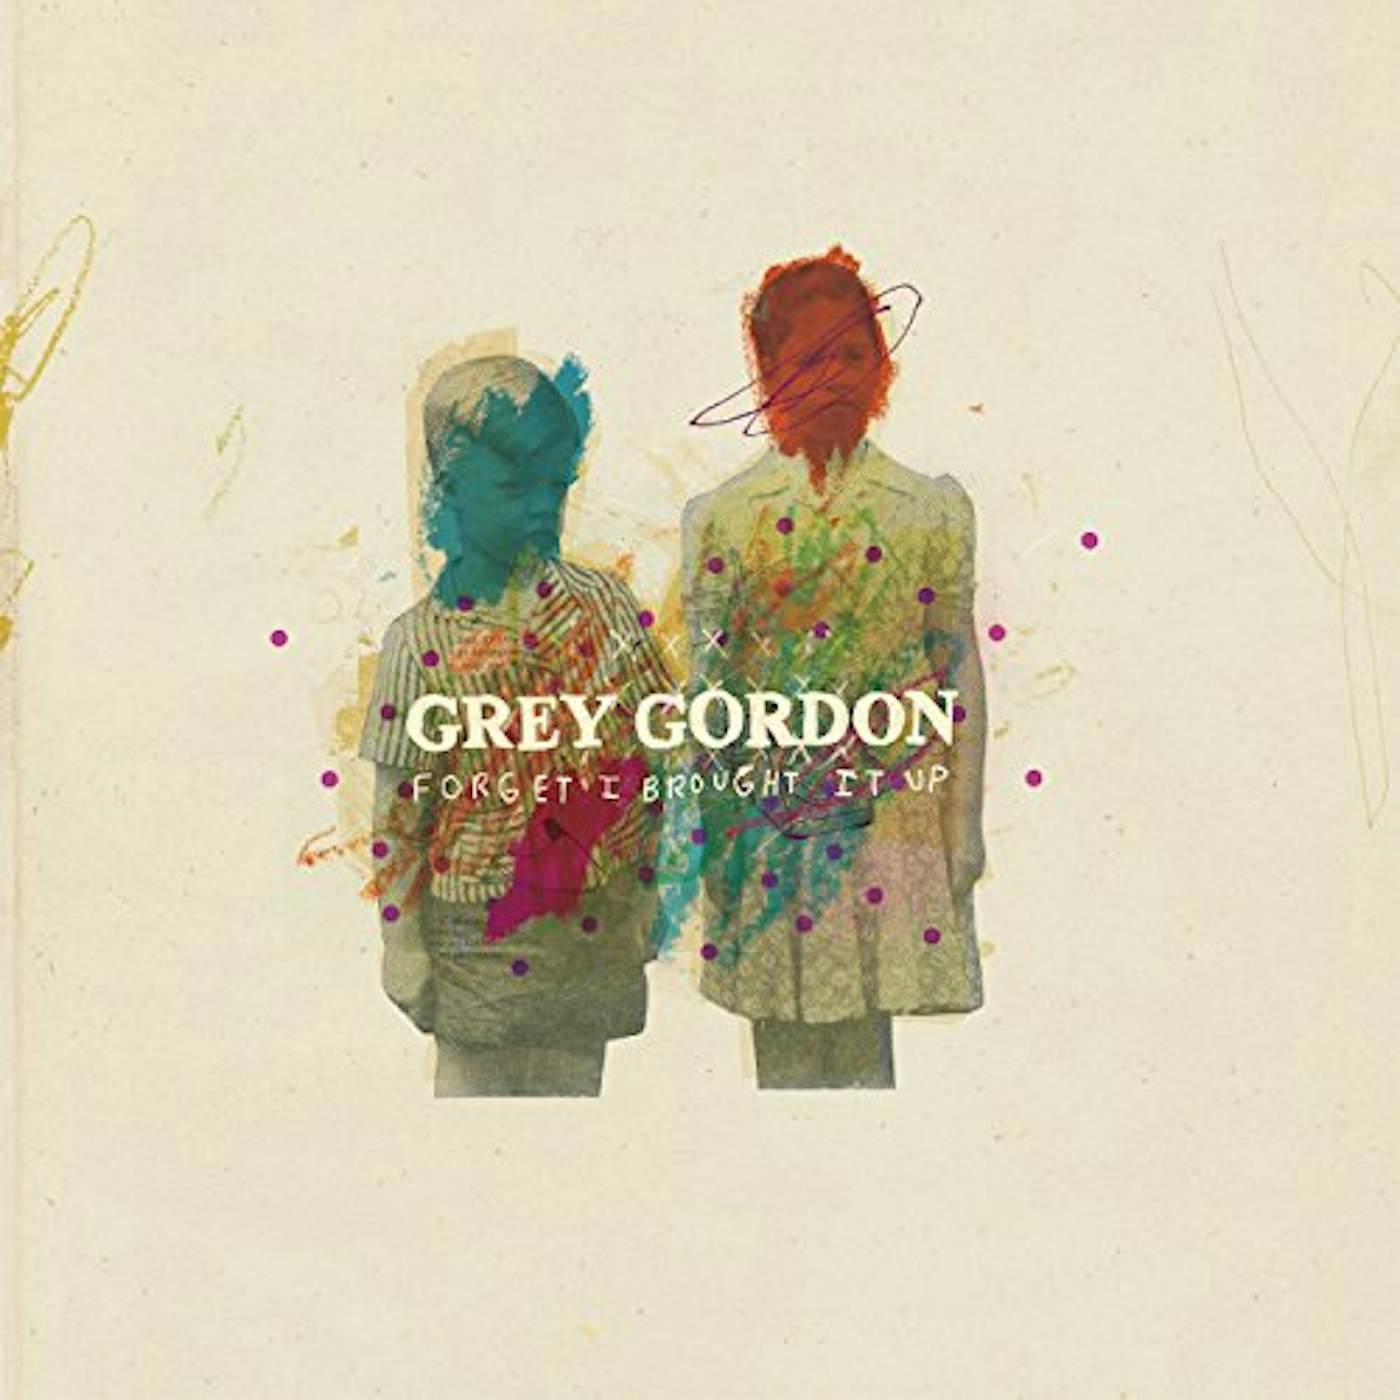 Grey Gordon FORGET I BROUGHT IT UP CD